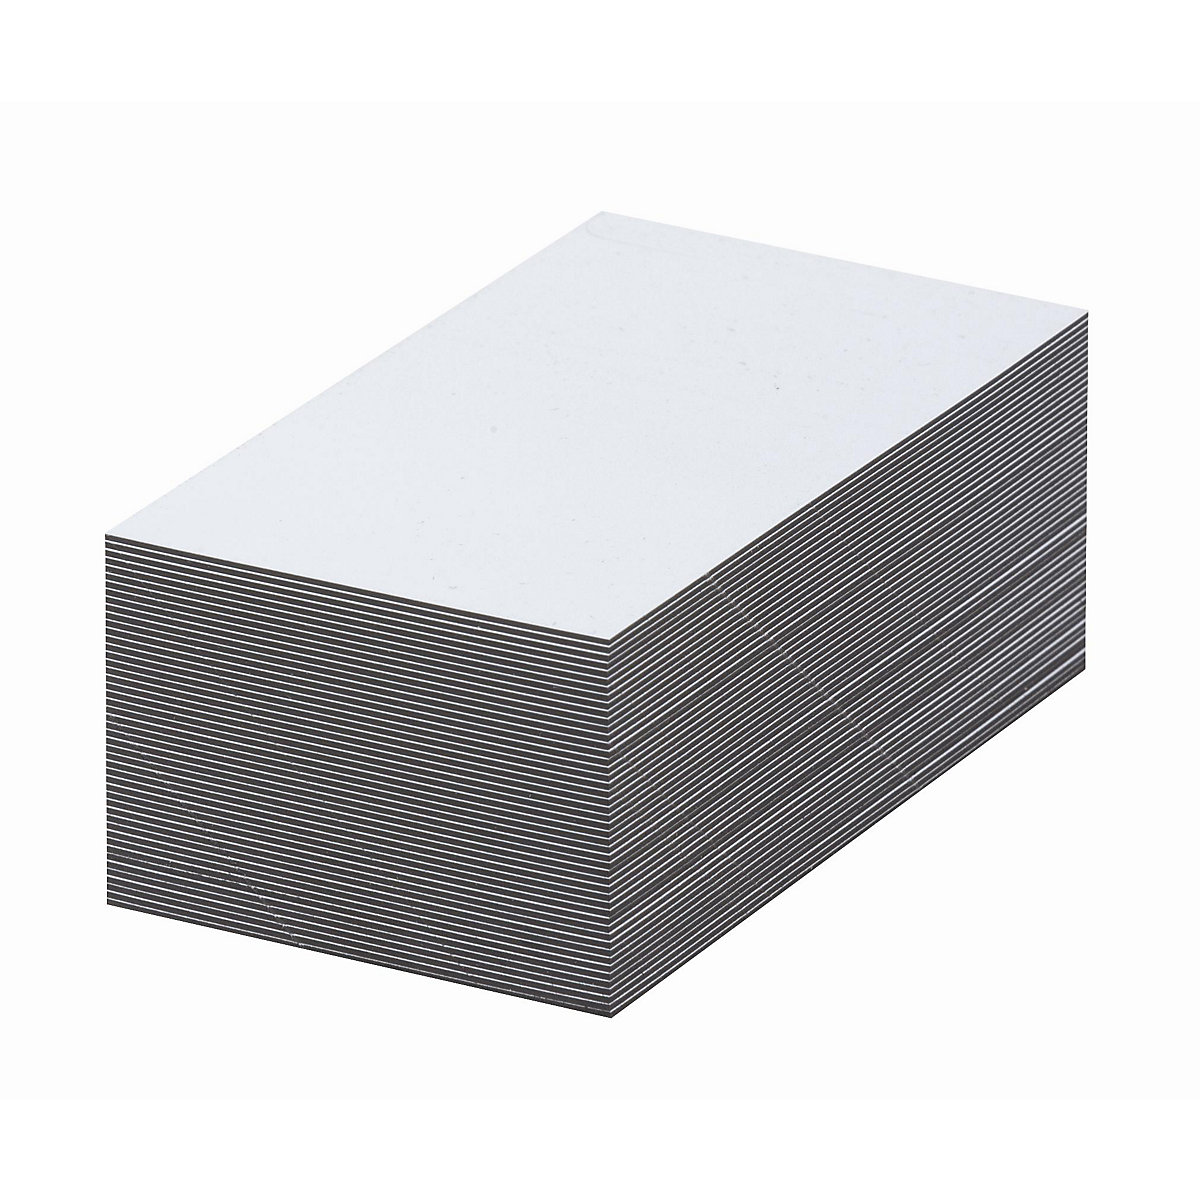 Magnetic storage labels, white, HxW 60 x 100 mm, pack of 100-12